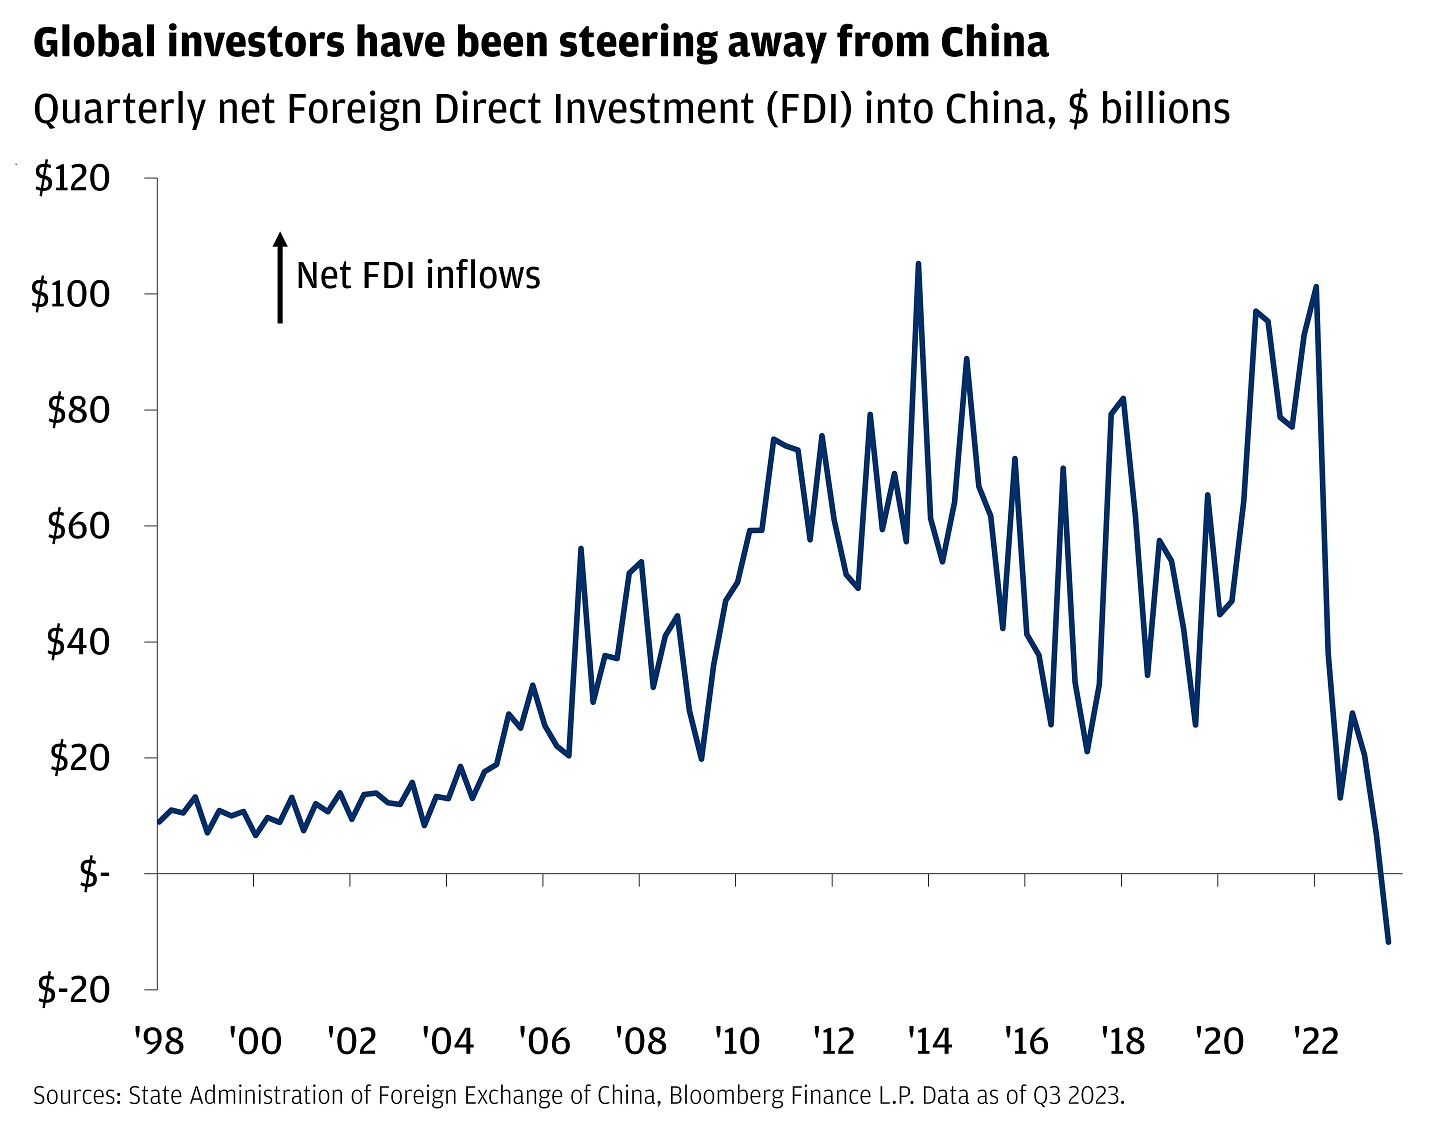 This chart shows the quarterly net Foreign Direct Investment (FDI) into China